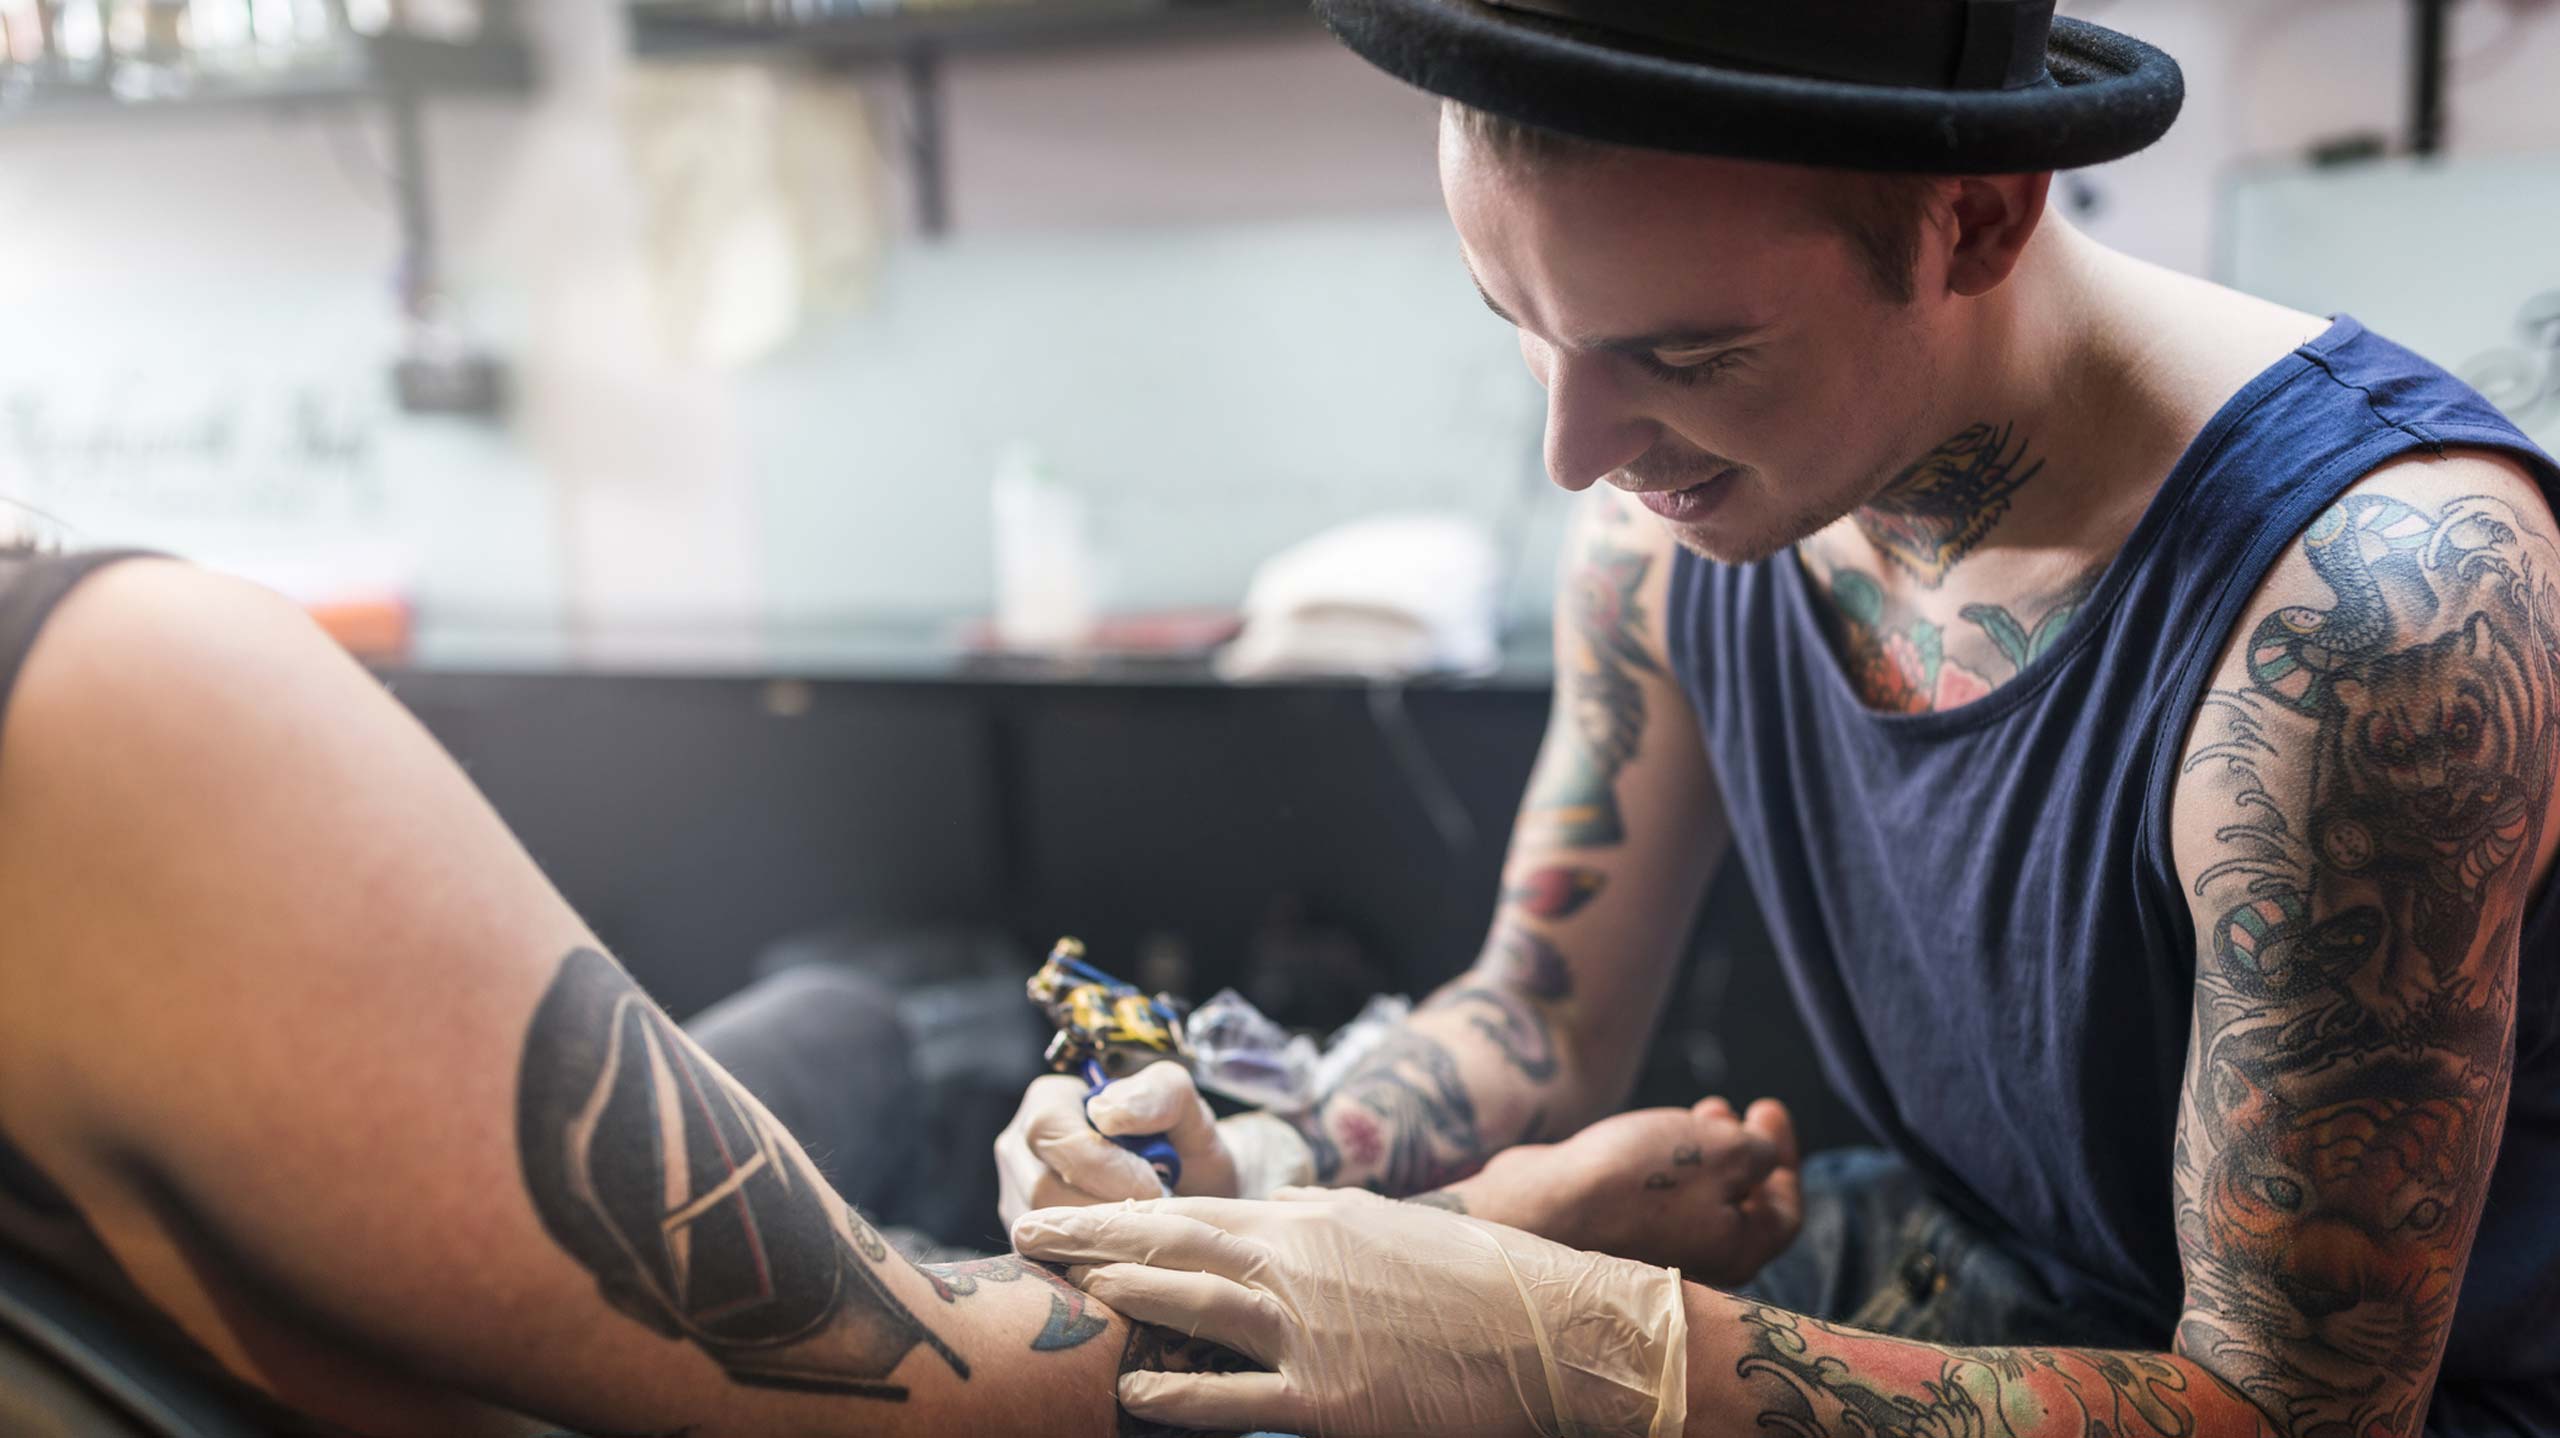 Numbing Creams For Tattoos Are Trending—But Are They Safe?